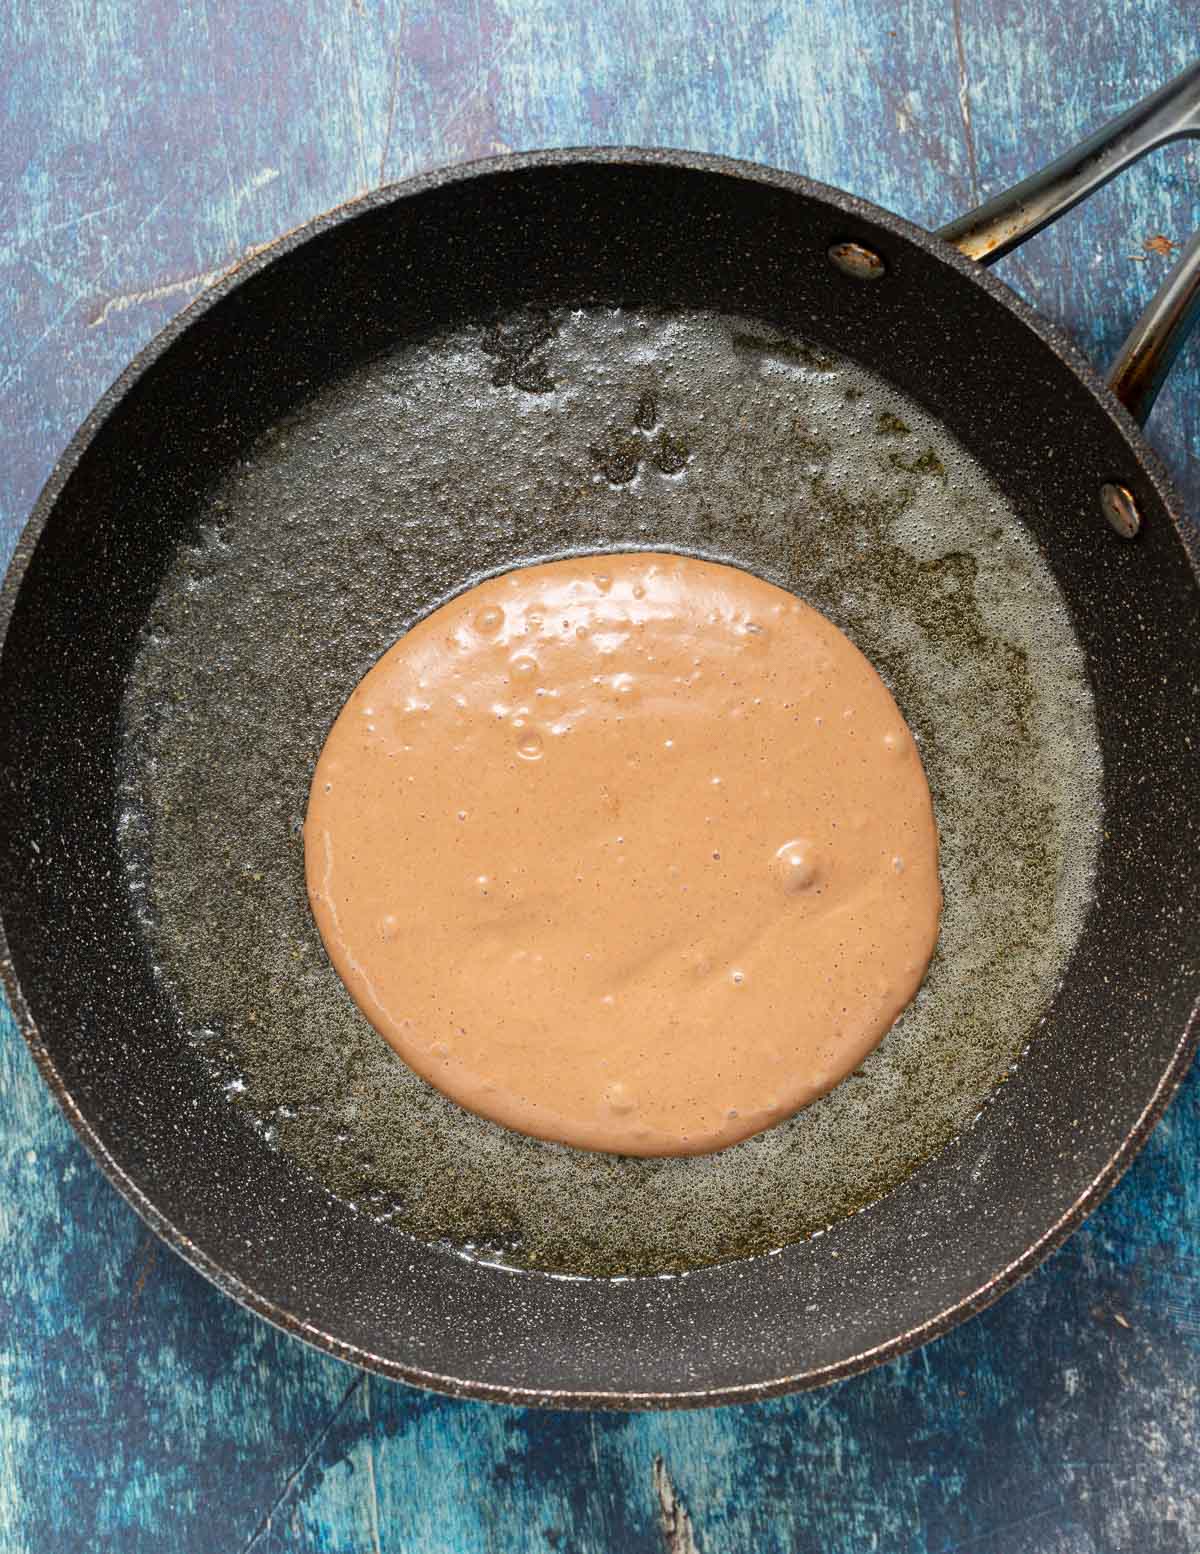 uncooked pancake in a pan